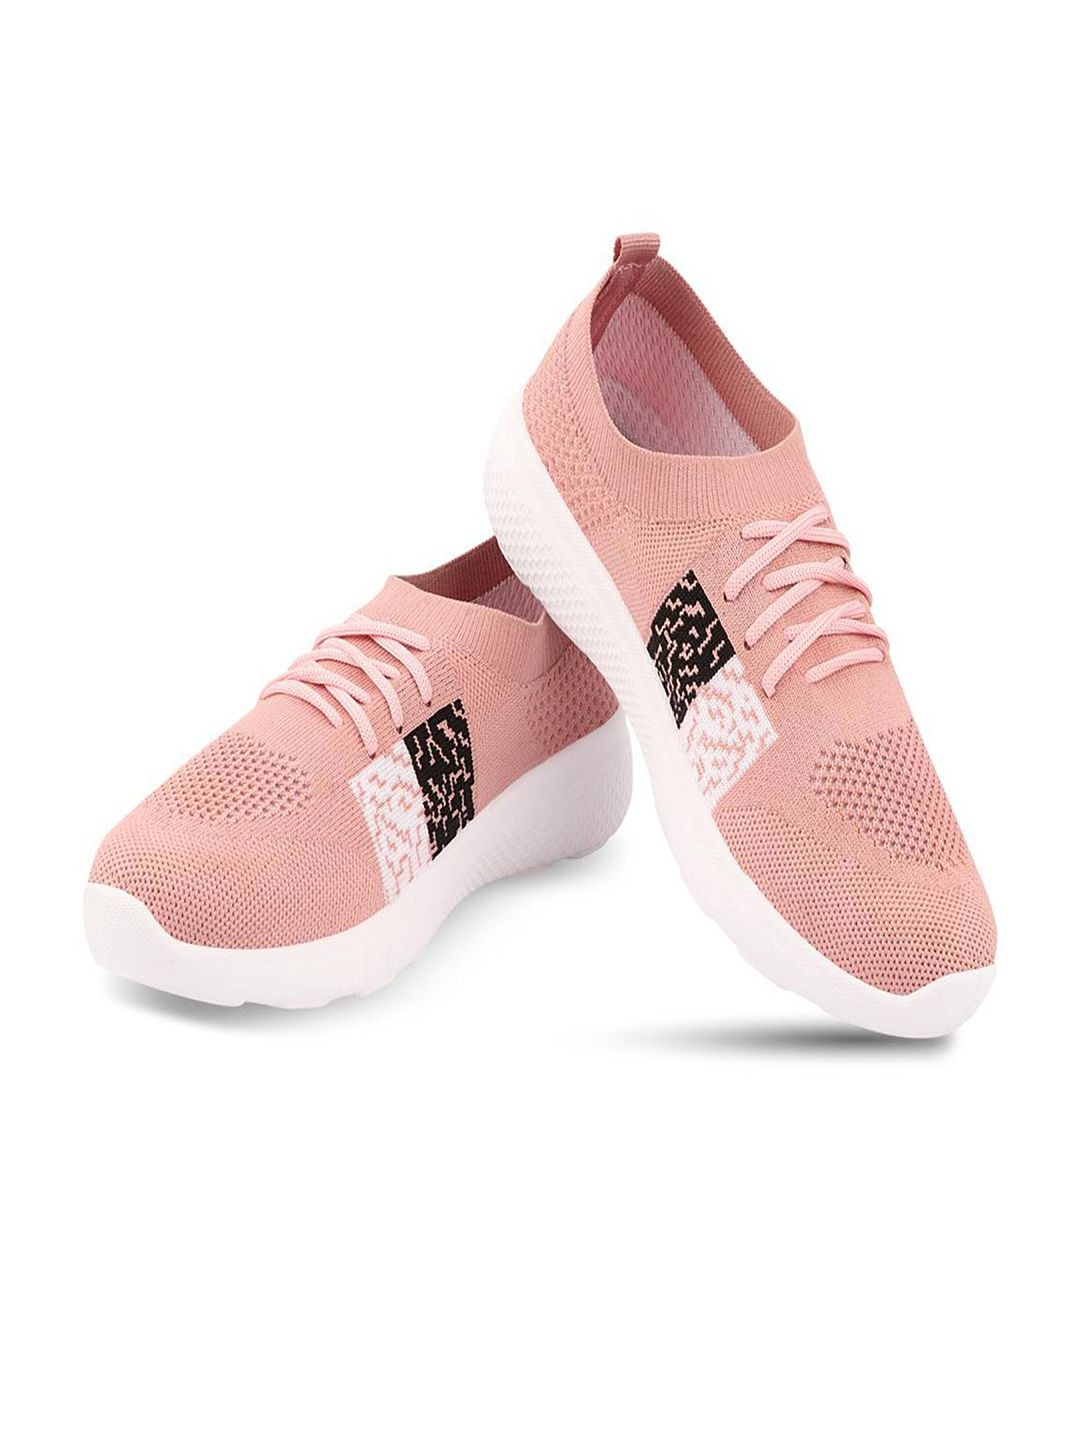 BEONZA Women Pink Mesh High-Top Running Non-Marking Shoes Price in India